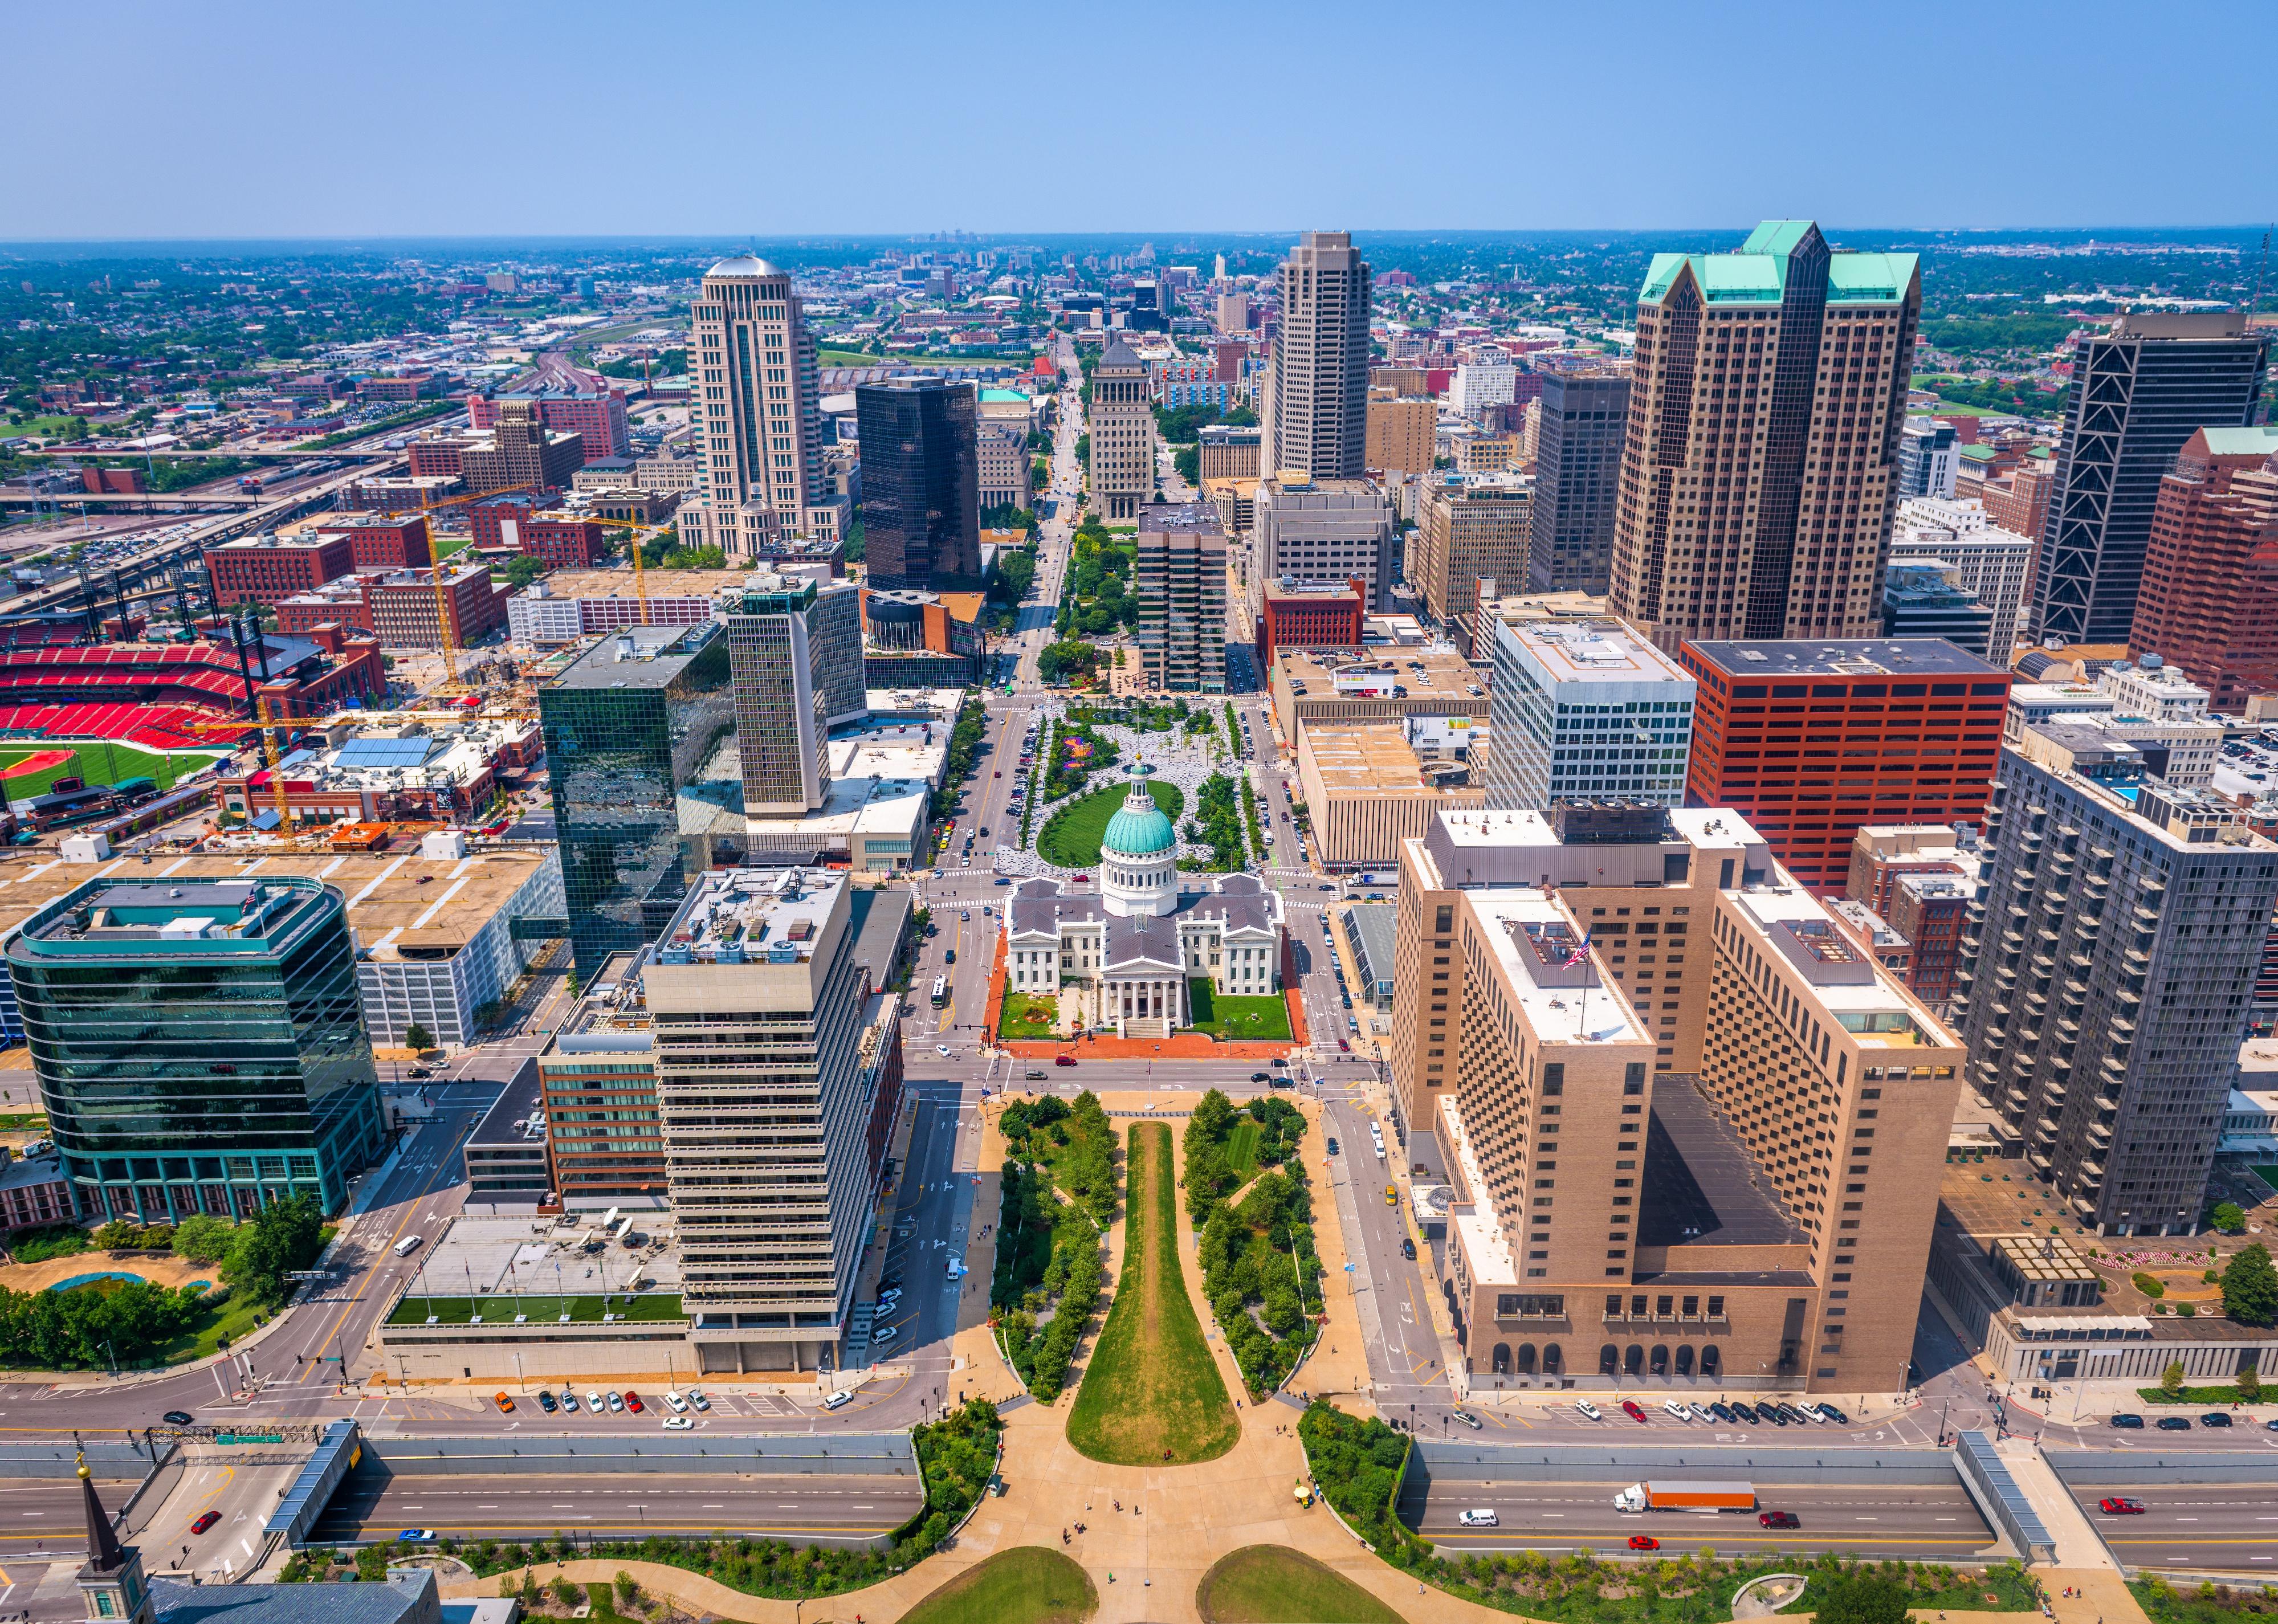 St. Louis downtown skyline from above.